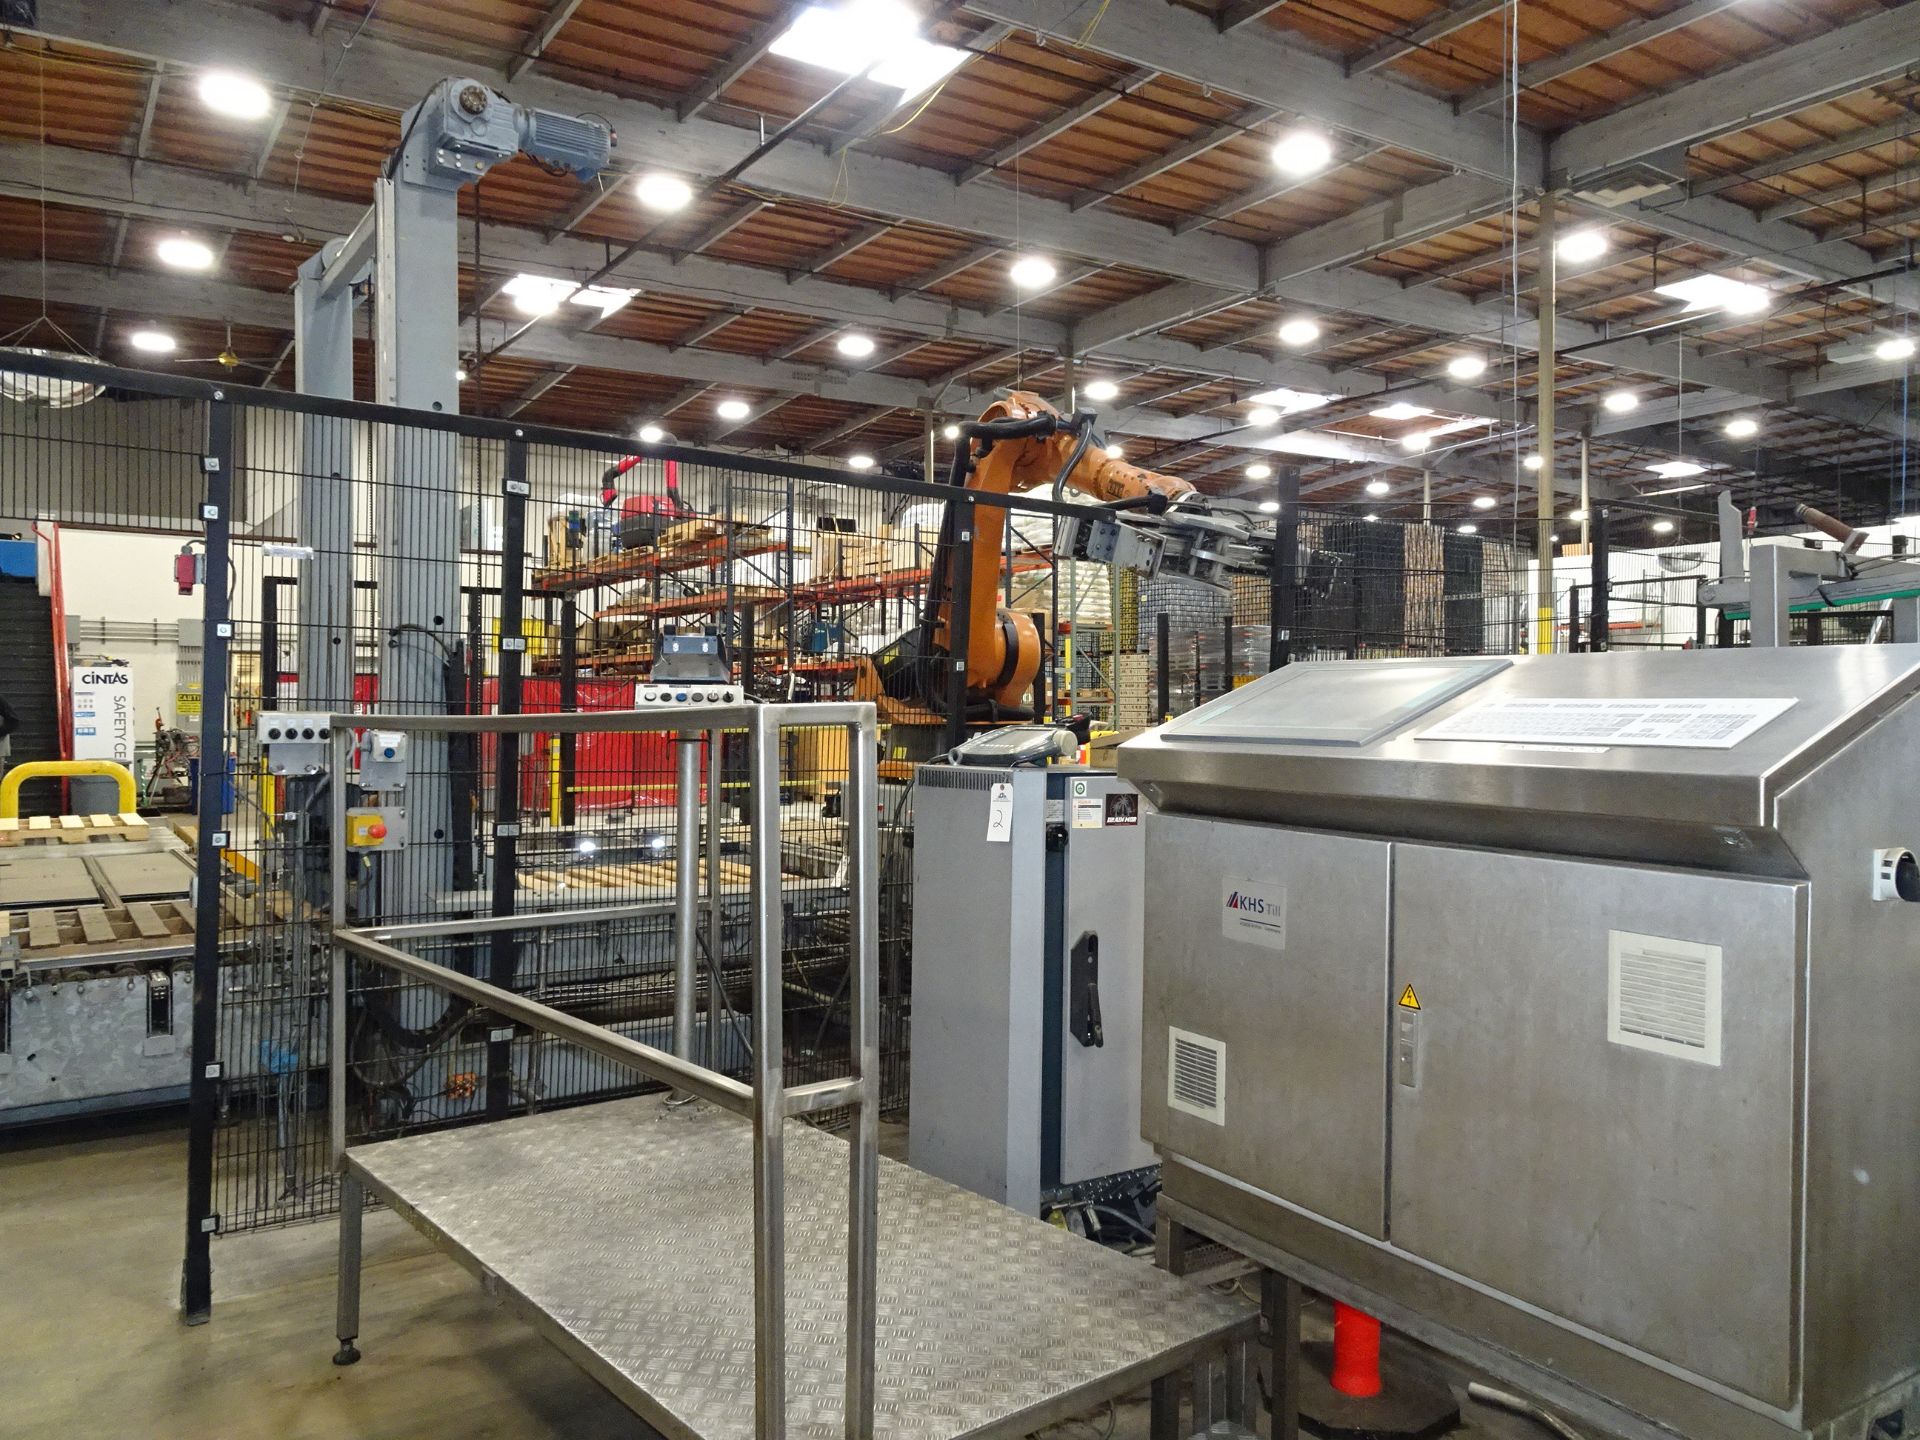 2006 Kuka/KHS Robot Palletizing Cell For Kegs, Palletizing Cell Setup For Destackin - Contact Rigger - Image 67 of 70